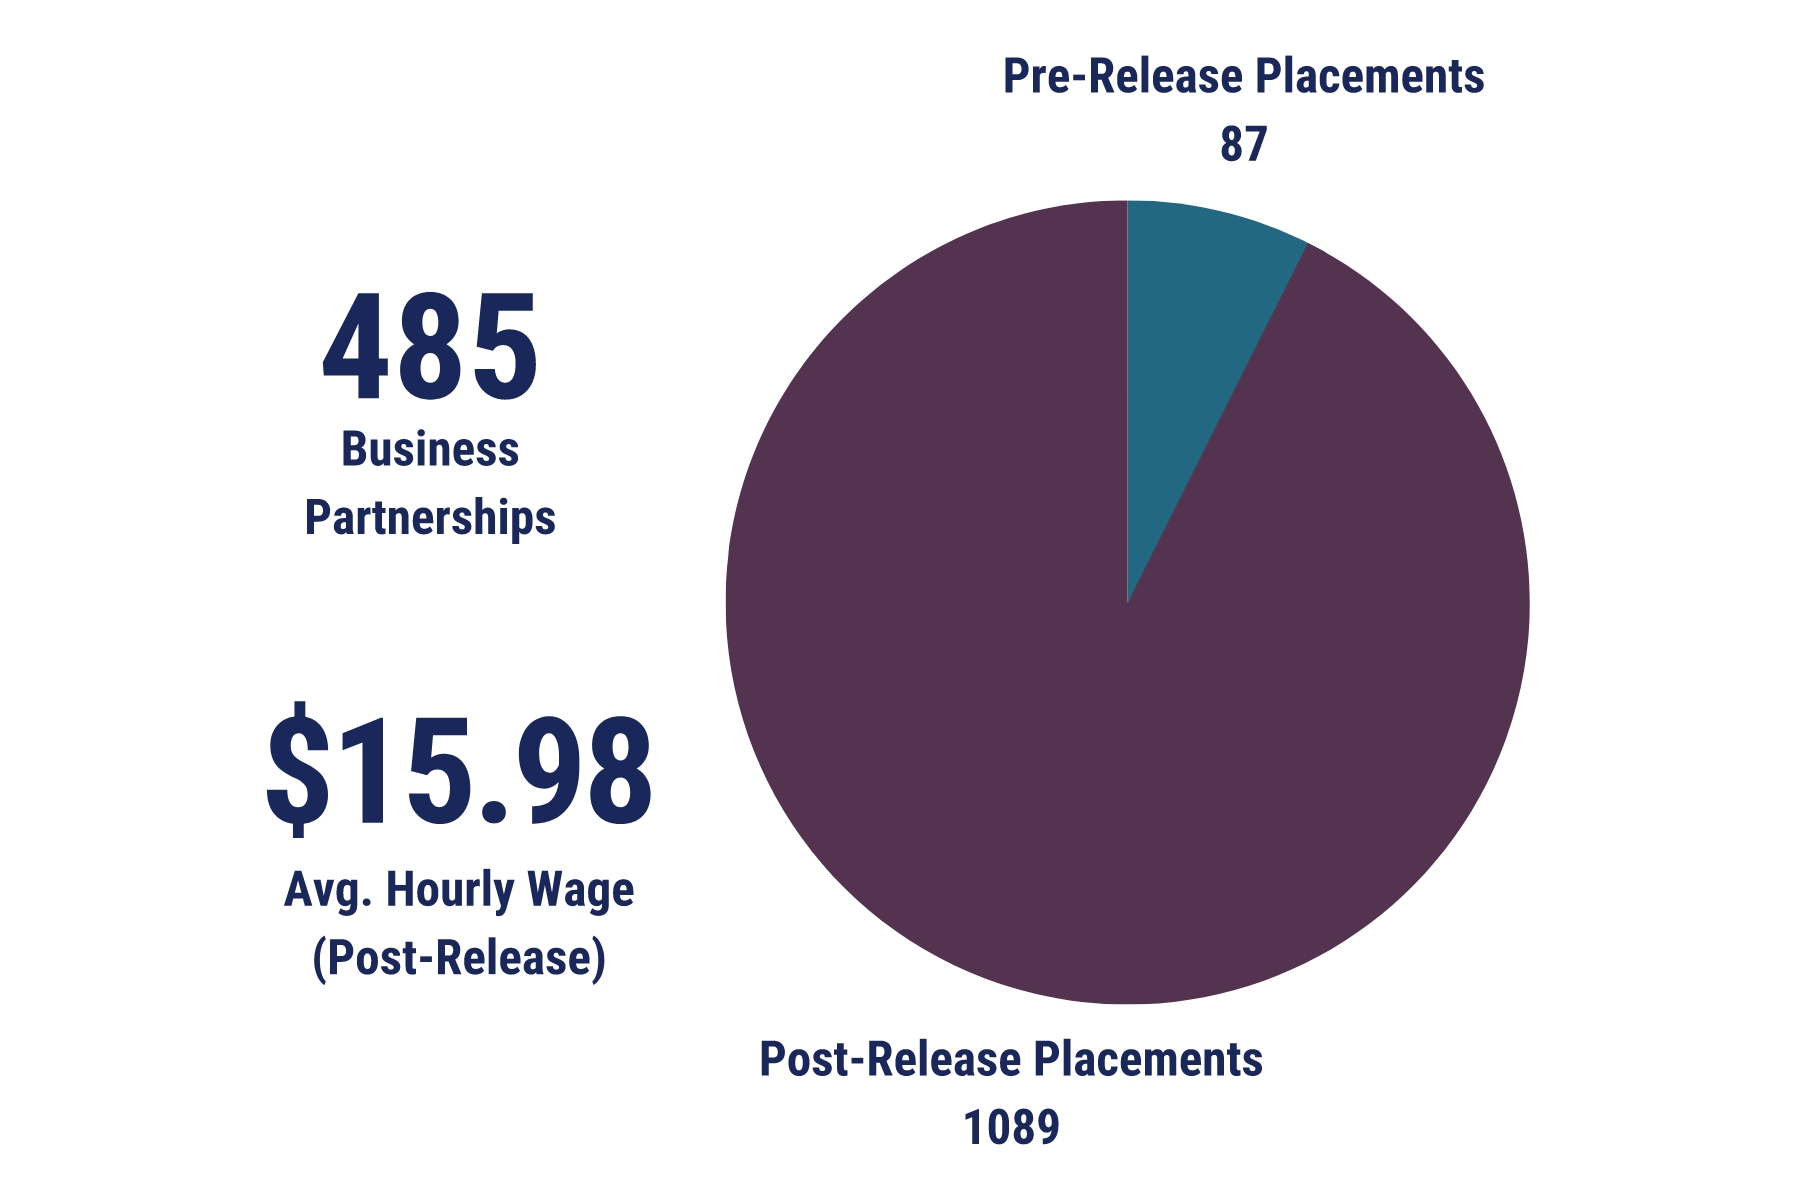 In 2022 HIRE had 485 business partnerships with an average hourly wage (post-release) of $15.98.  There were 87 pre-release placements and 1,089 post release placements. 